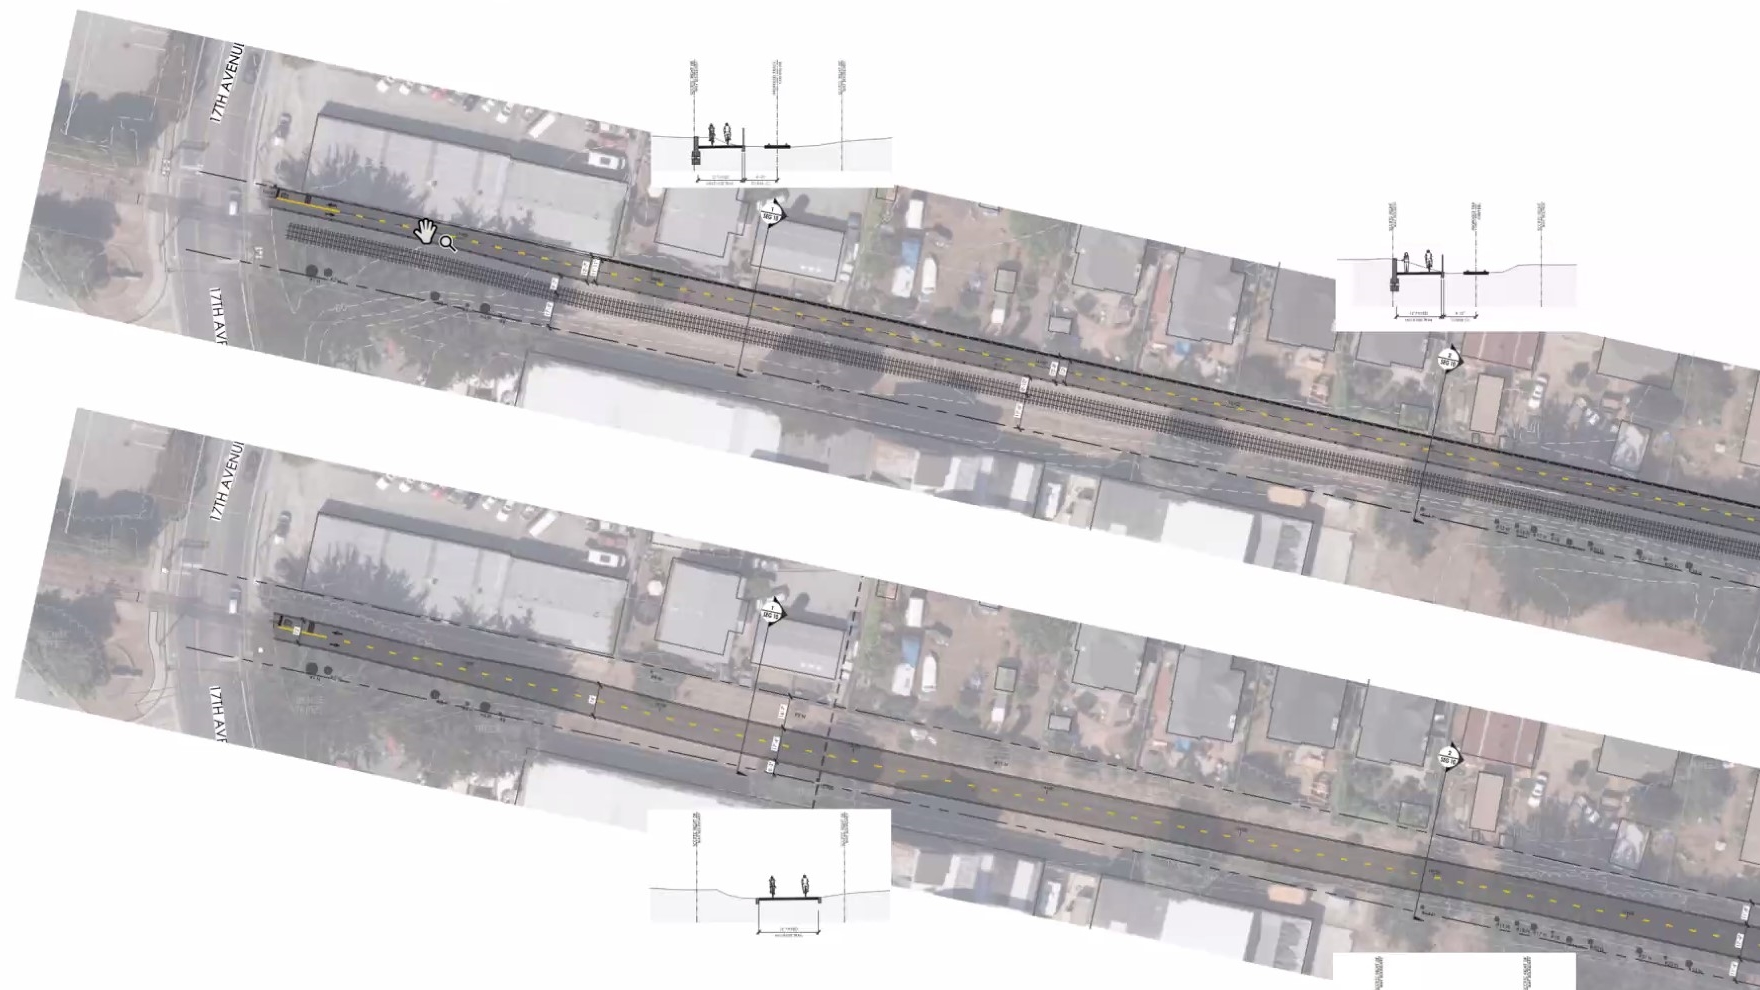 At top, planners showed an “ultimate” path parallel to the rail line near 17th Avenue. At bottom, an “interim” rail line shows a path where the train tracks now stand. (County of Santa Cruz)